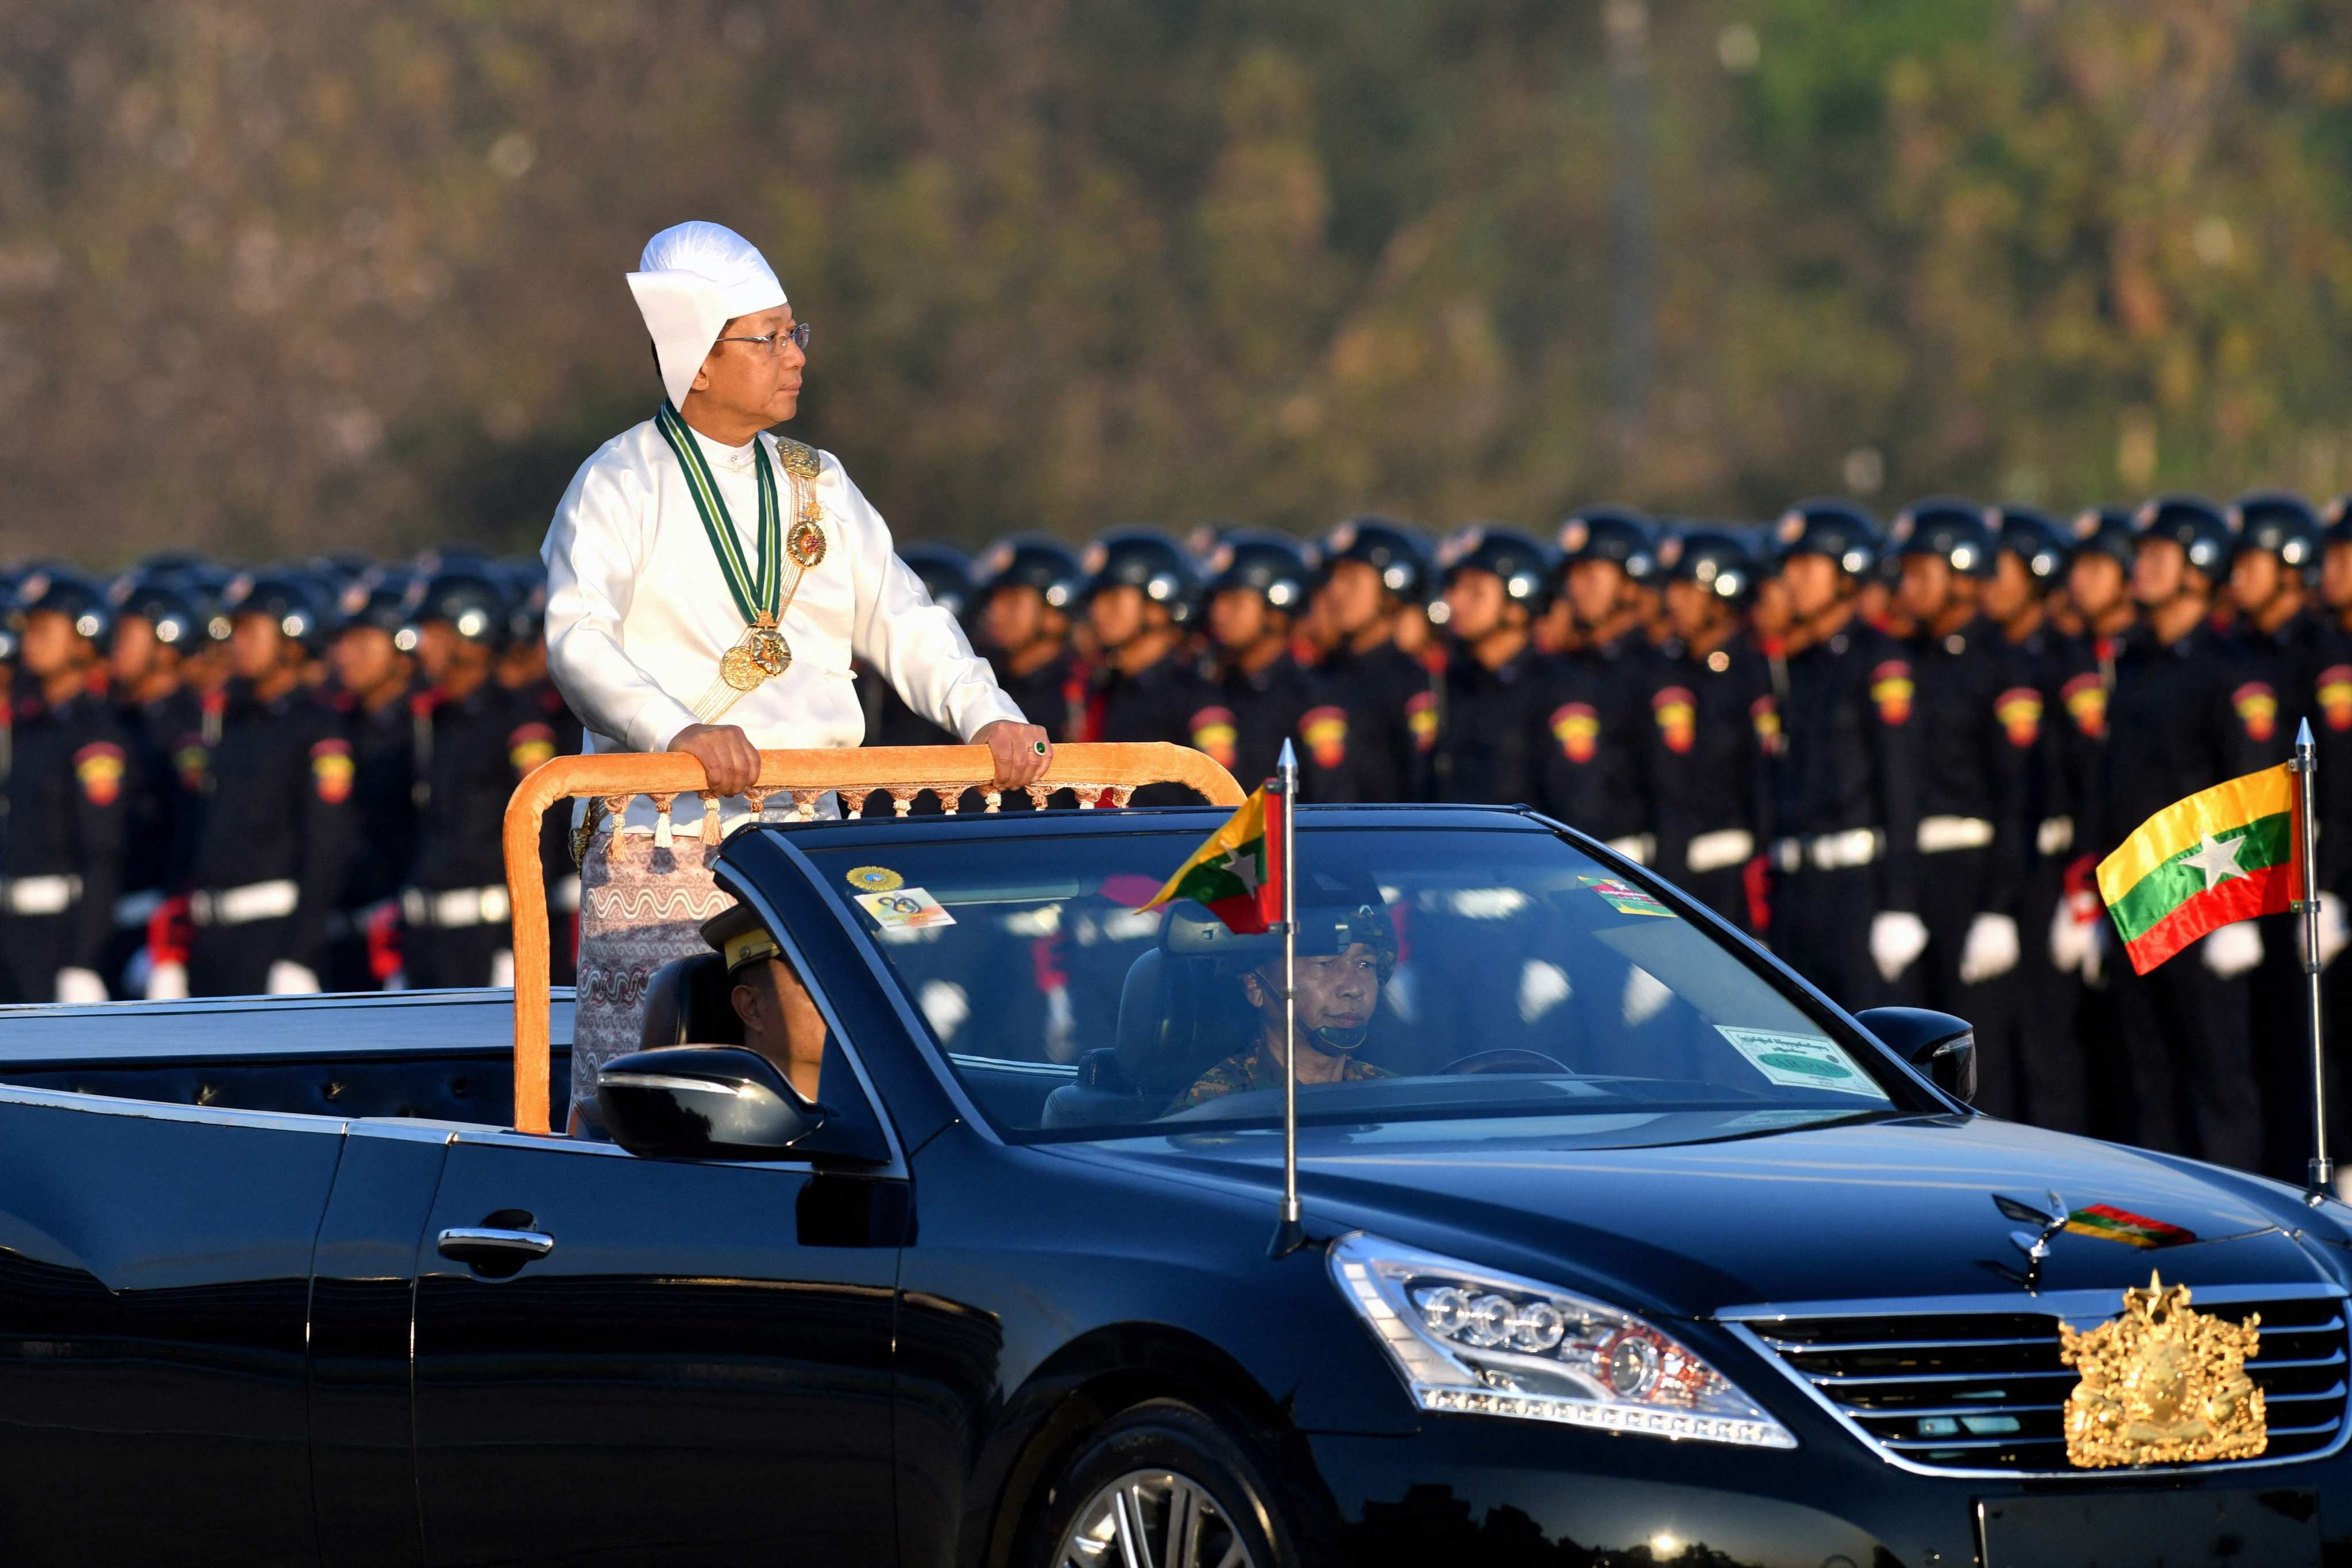 (FILES) Myanmar’s military chief Min Aung Hlaing stands in a car as he oversees a military display at a parade ground to mark the country’s Independence Day in Naypyidaw on January 4, 2023. Myanmar’s National Defence and Security Council agreed July 31, 2023 to extend the country’s state of emergency by six months, state media said, likely delaying elections the junta had pledged to hold by August. (Photo by AFP)